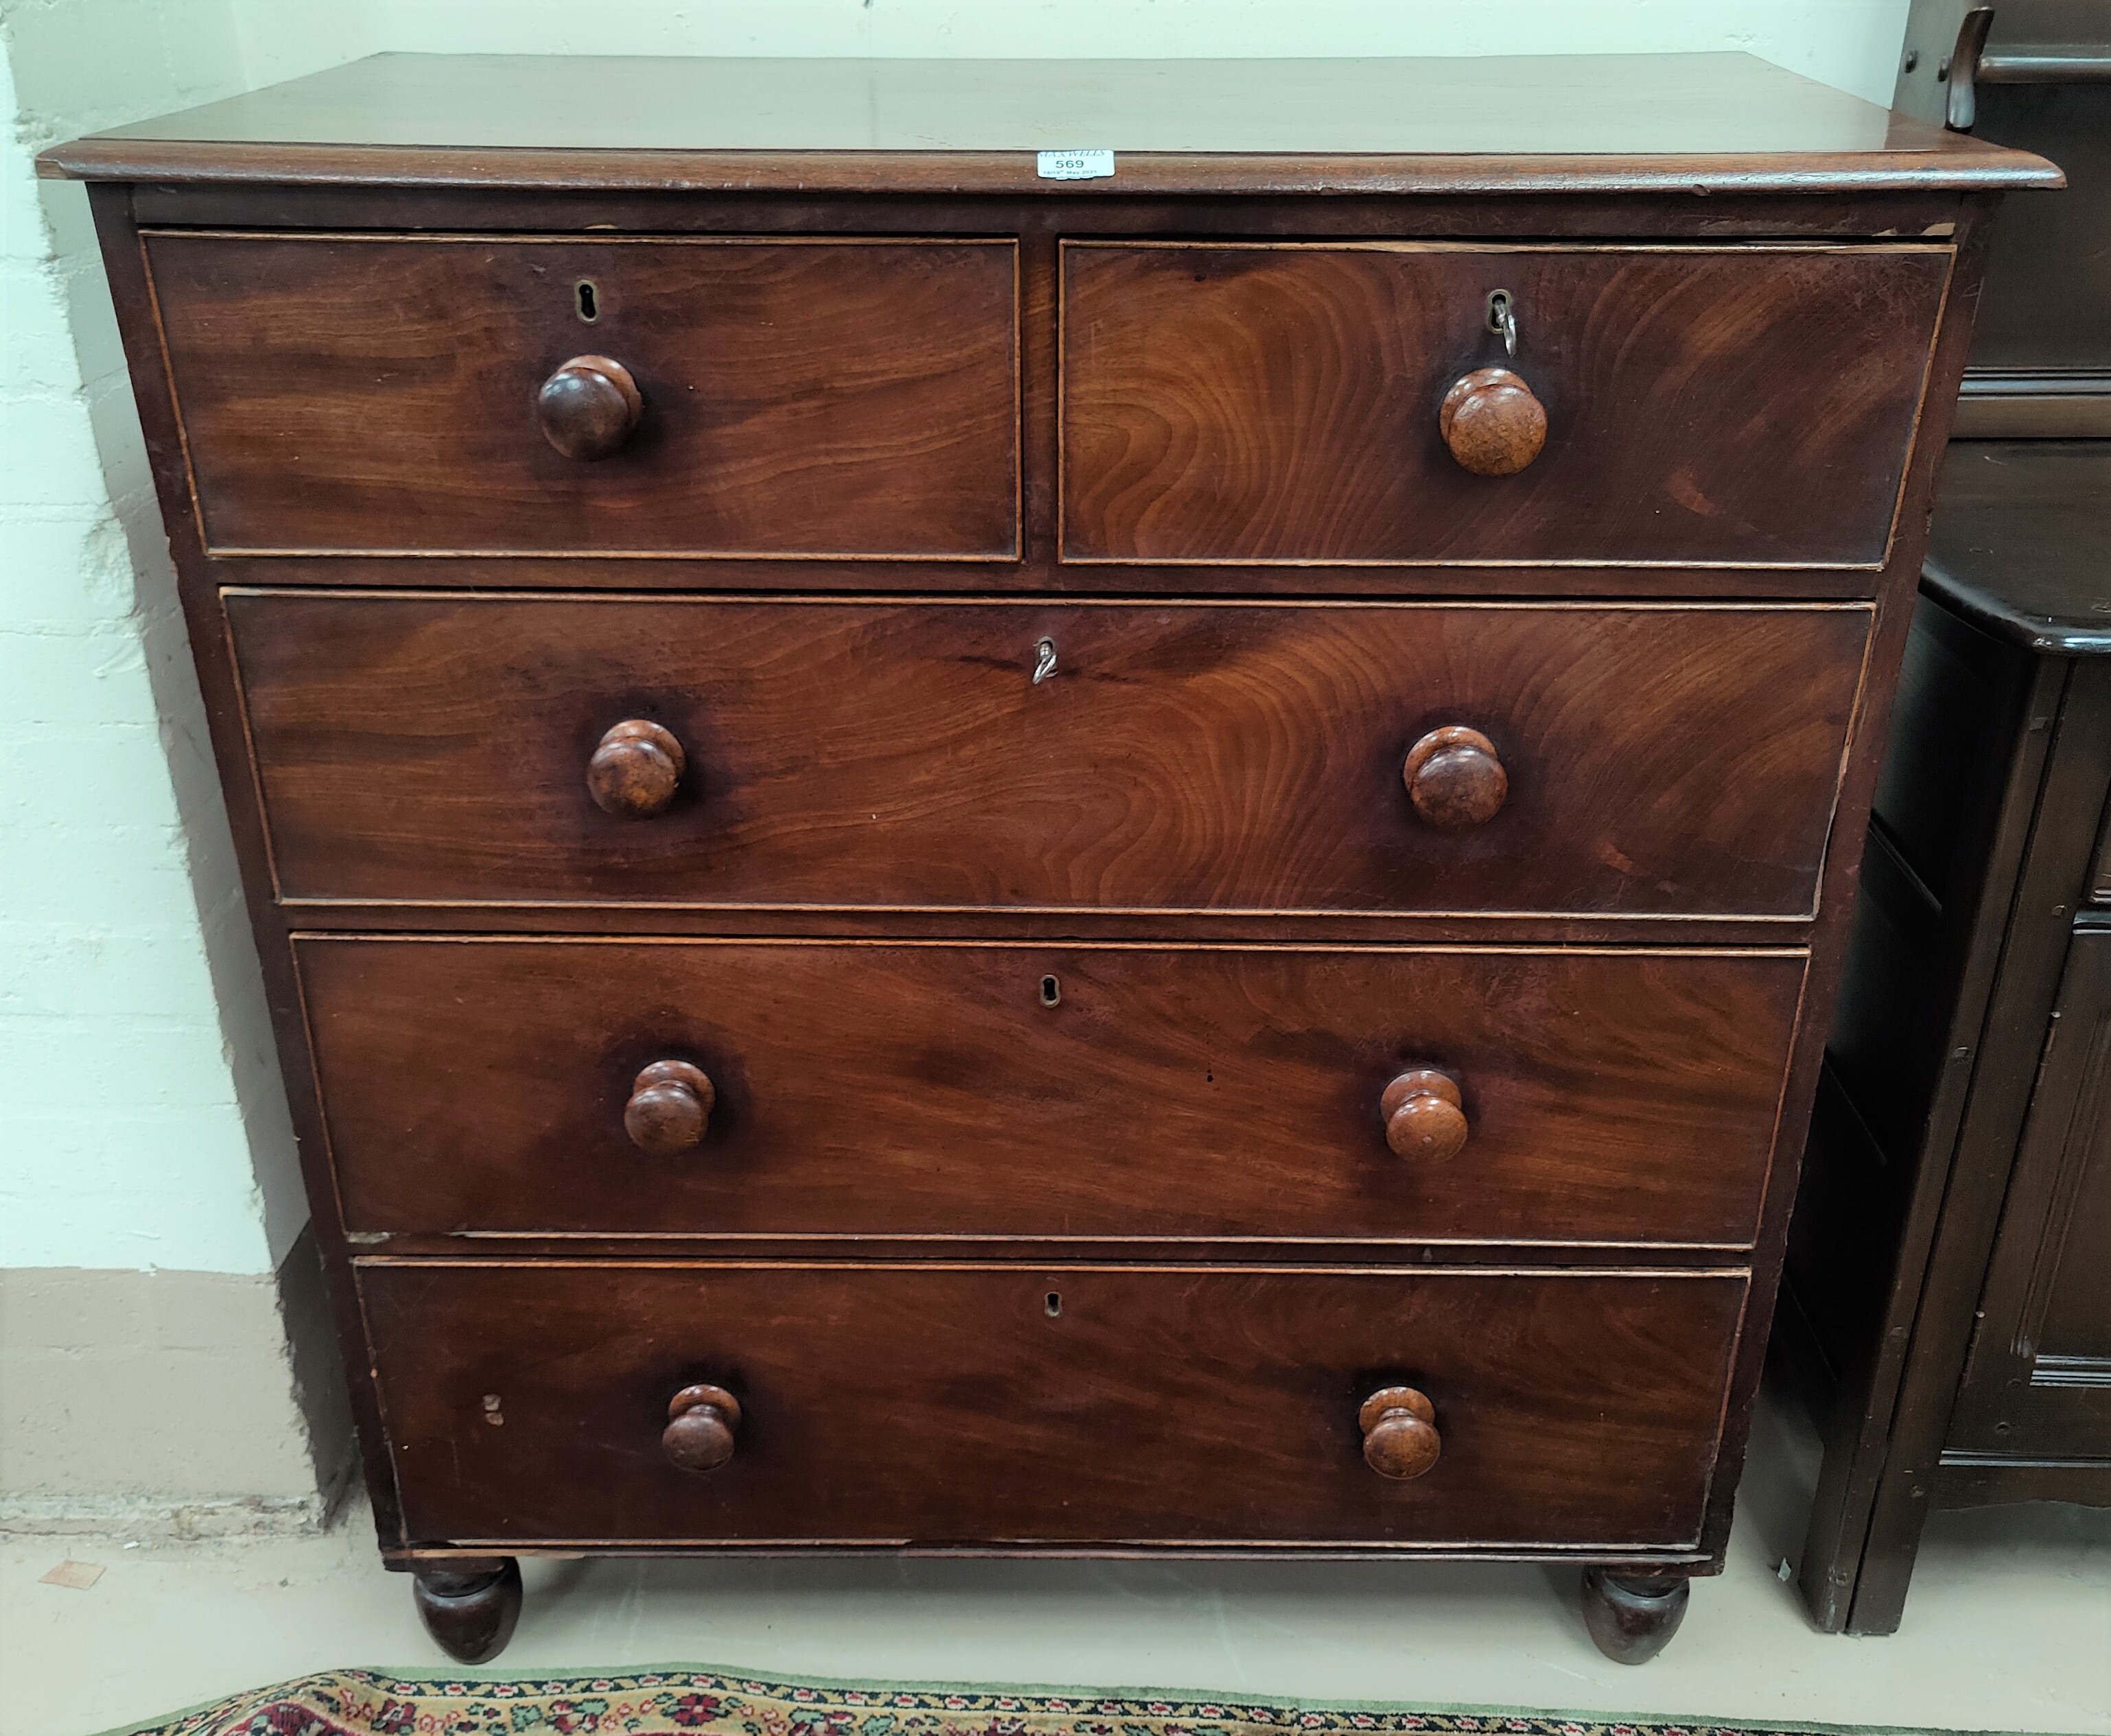 A Victorian mahogany chest of 3 long and 2 short drawers, with knob handles